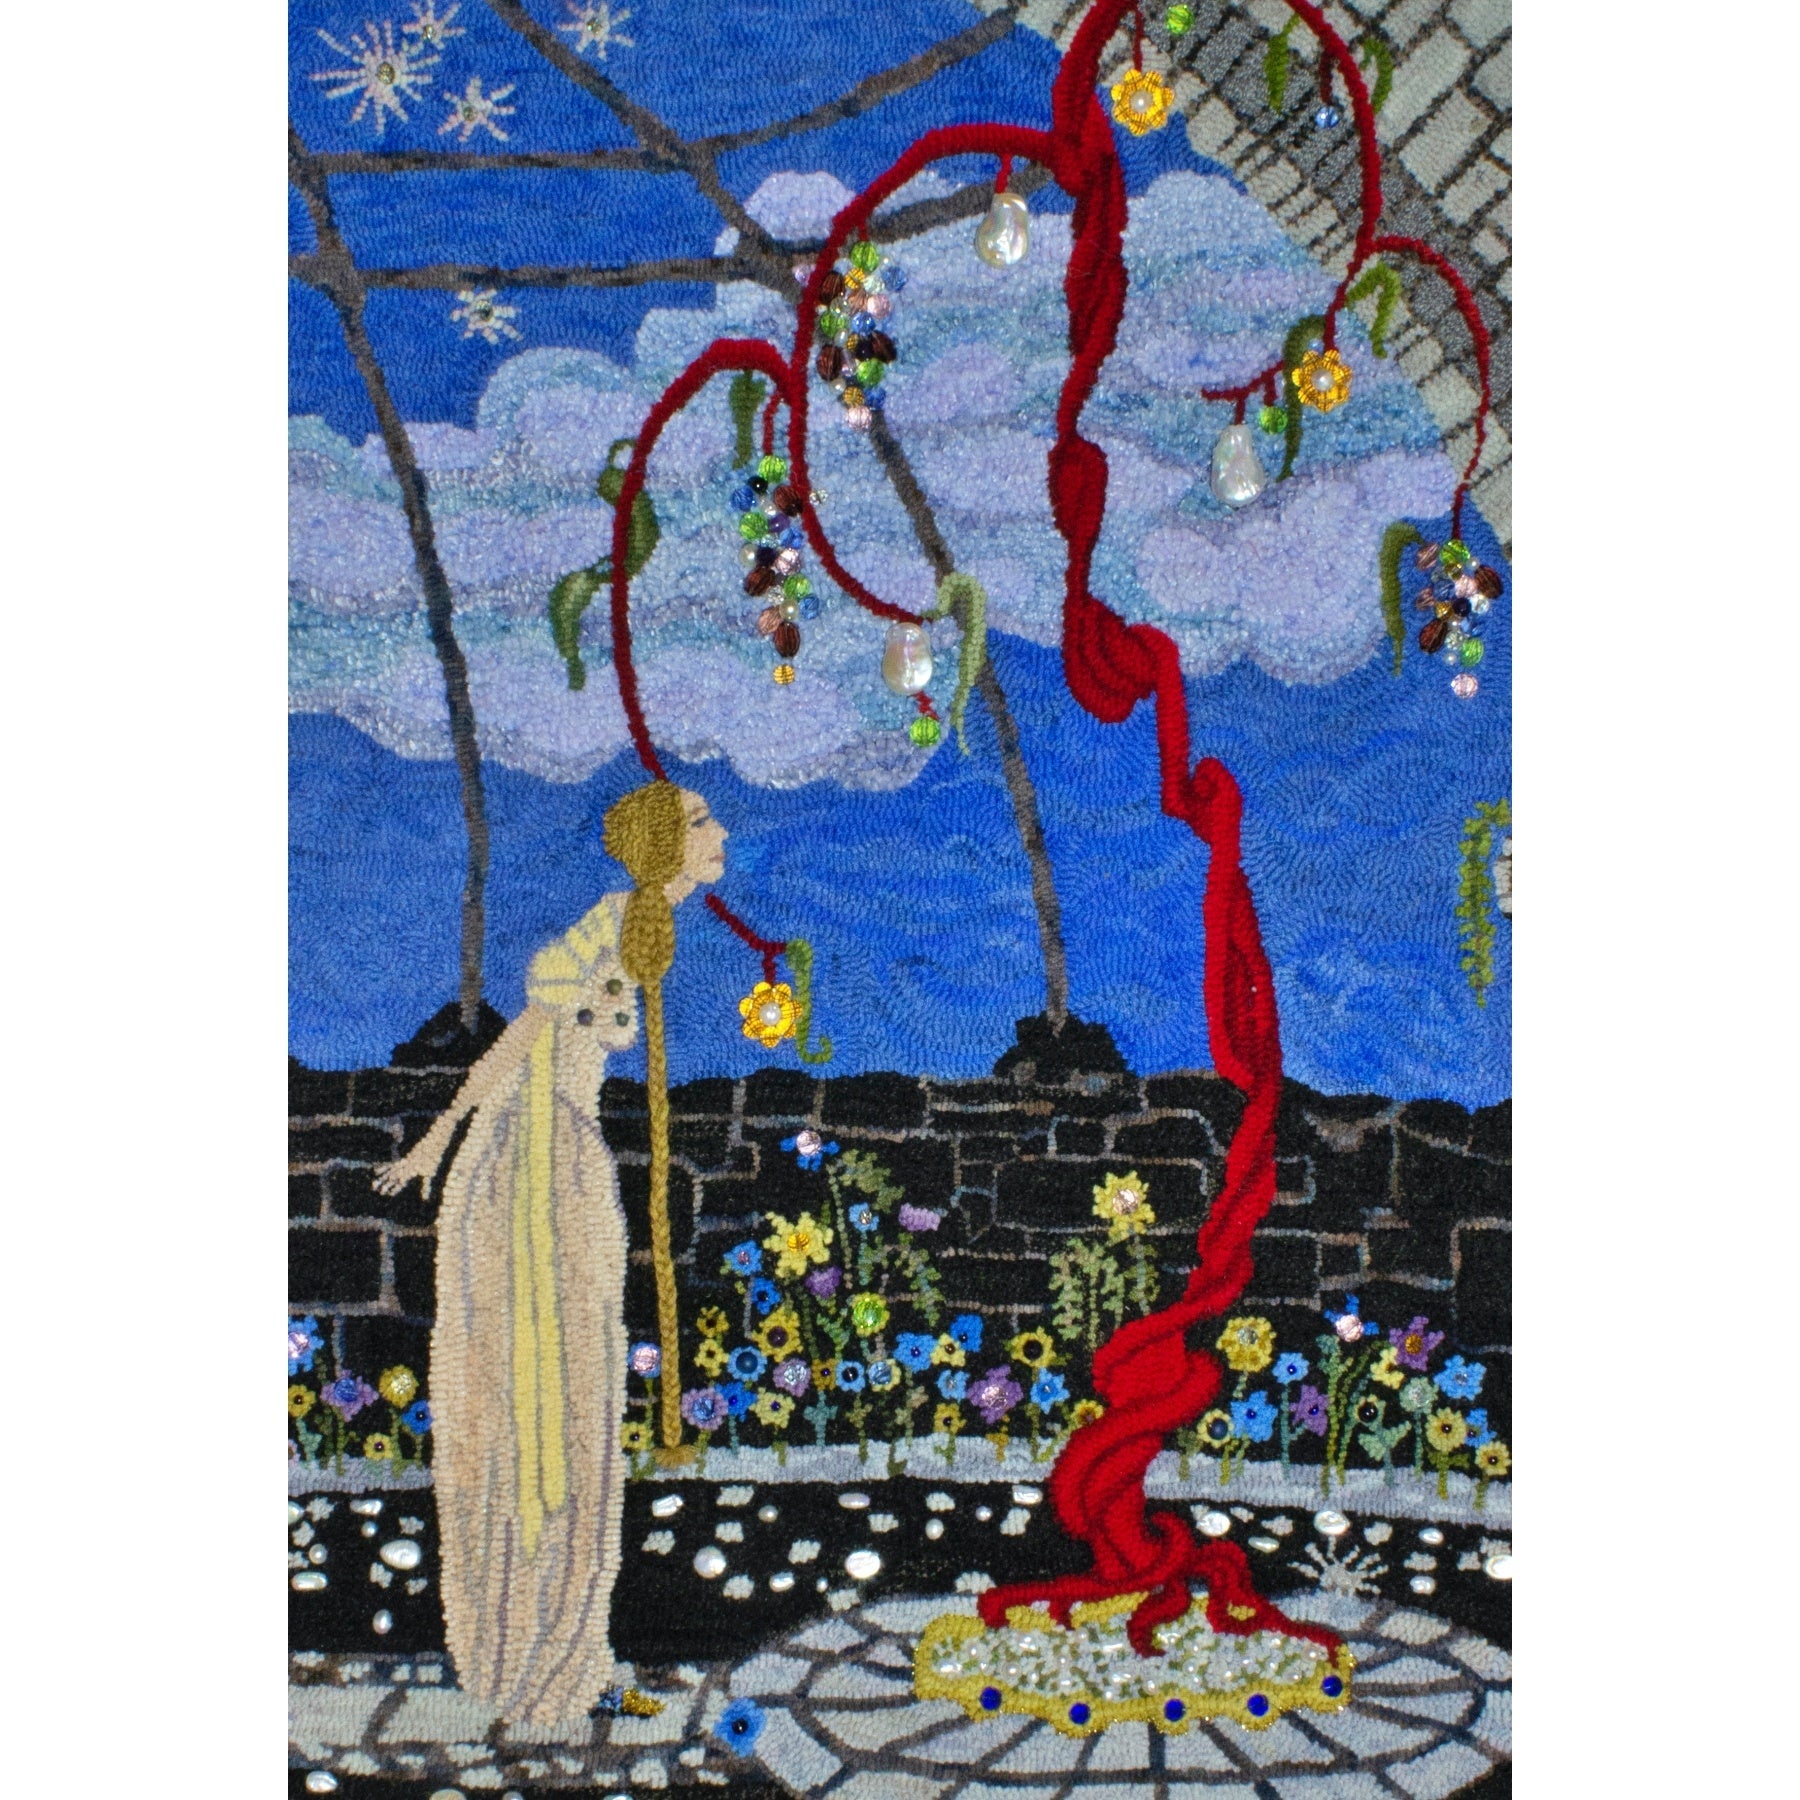 A Tree of Marvelous Beauty, ill. Virginia Francis Sterret, 1919, rug hooked by Cindy Irwin